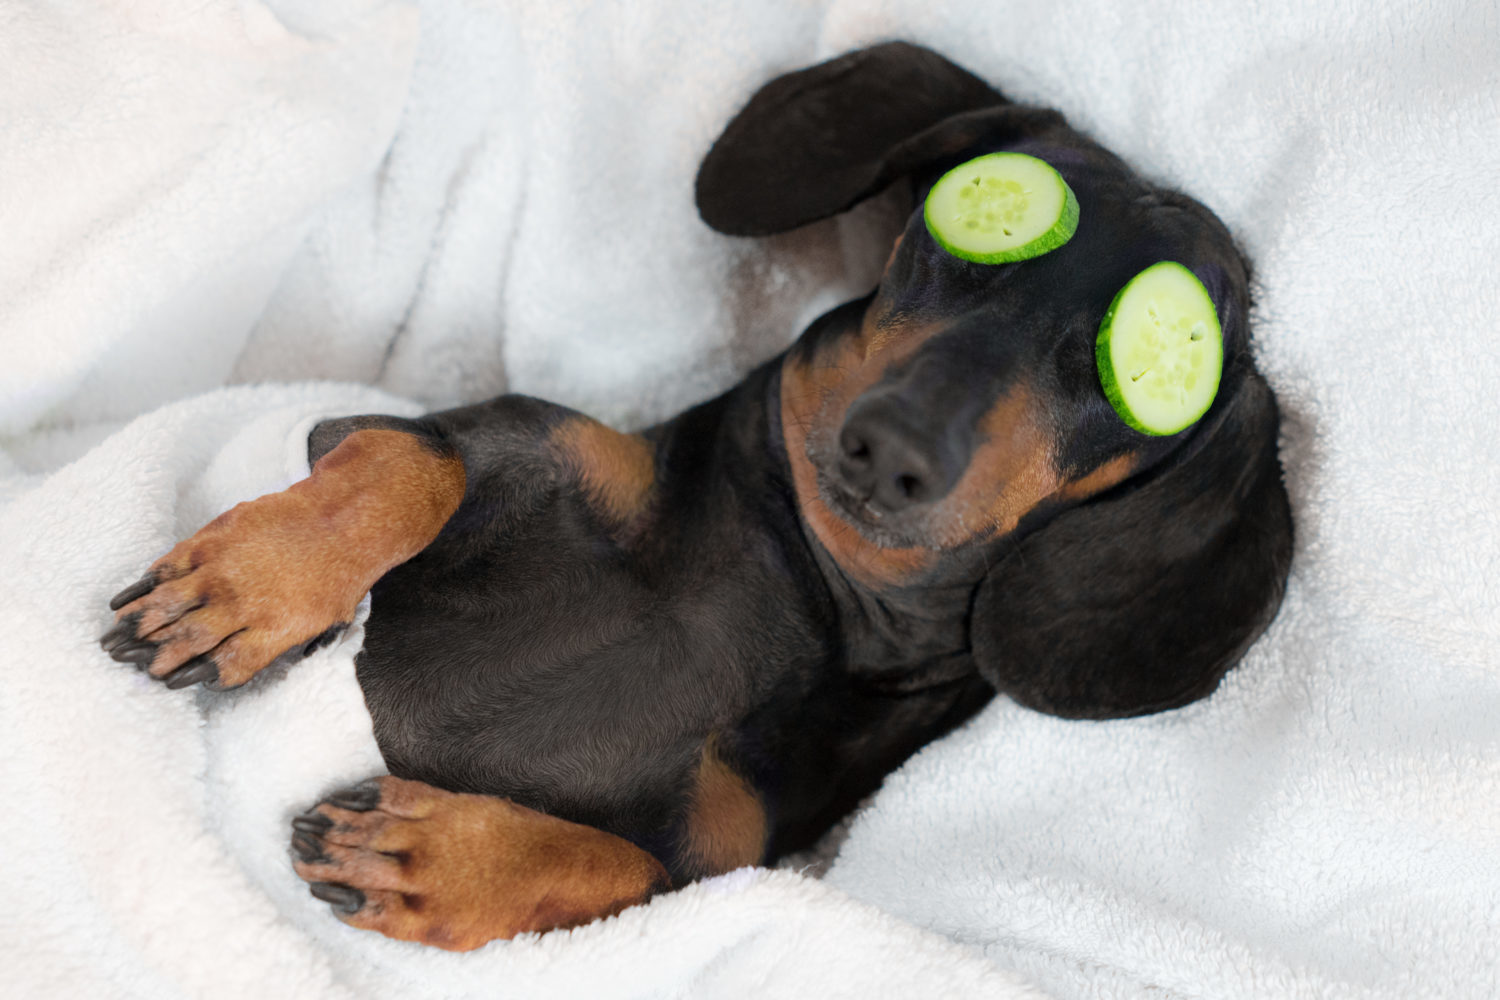 Canalside Inn dog dachshund, black and tan, relaxed from spa procedures on face with cucumber, covered with a towel